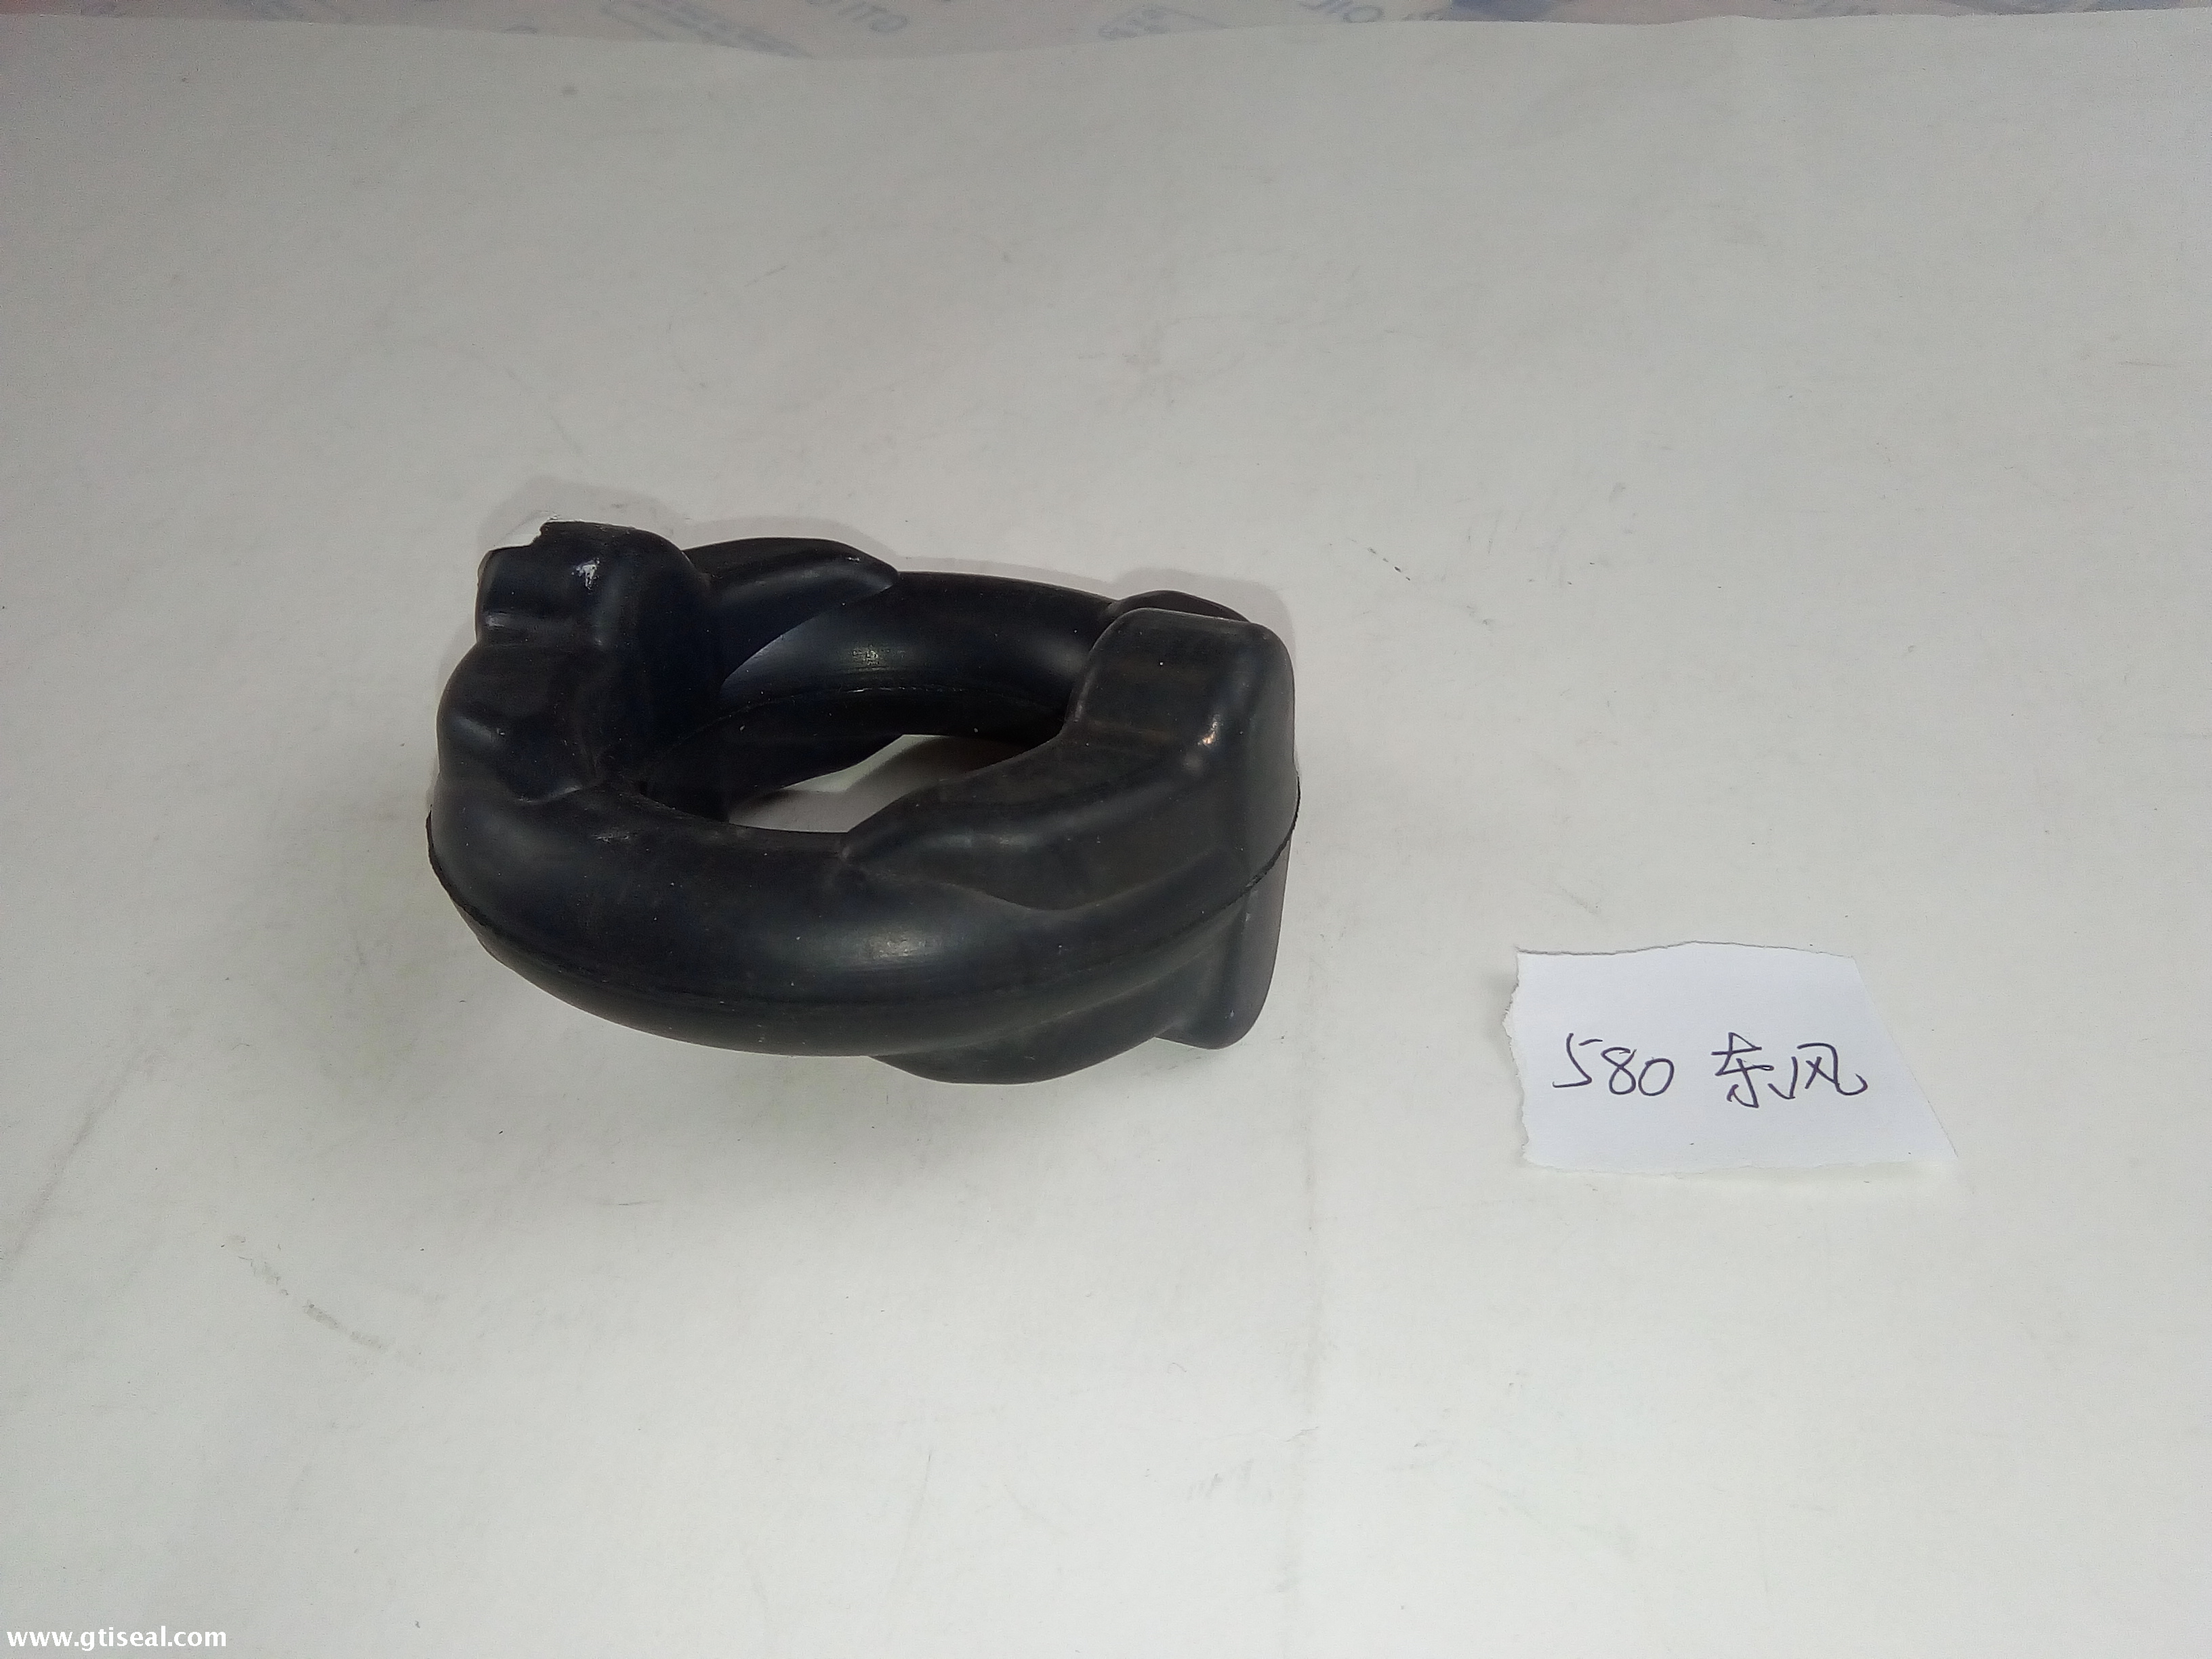 Auto parts car part,rubber parts,rubber products supplier by GTI